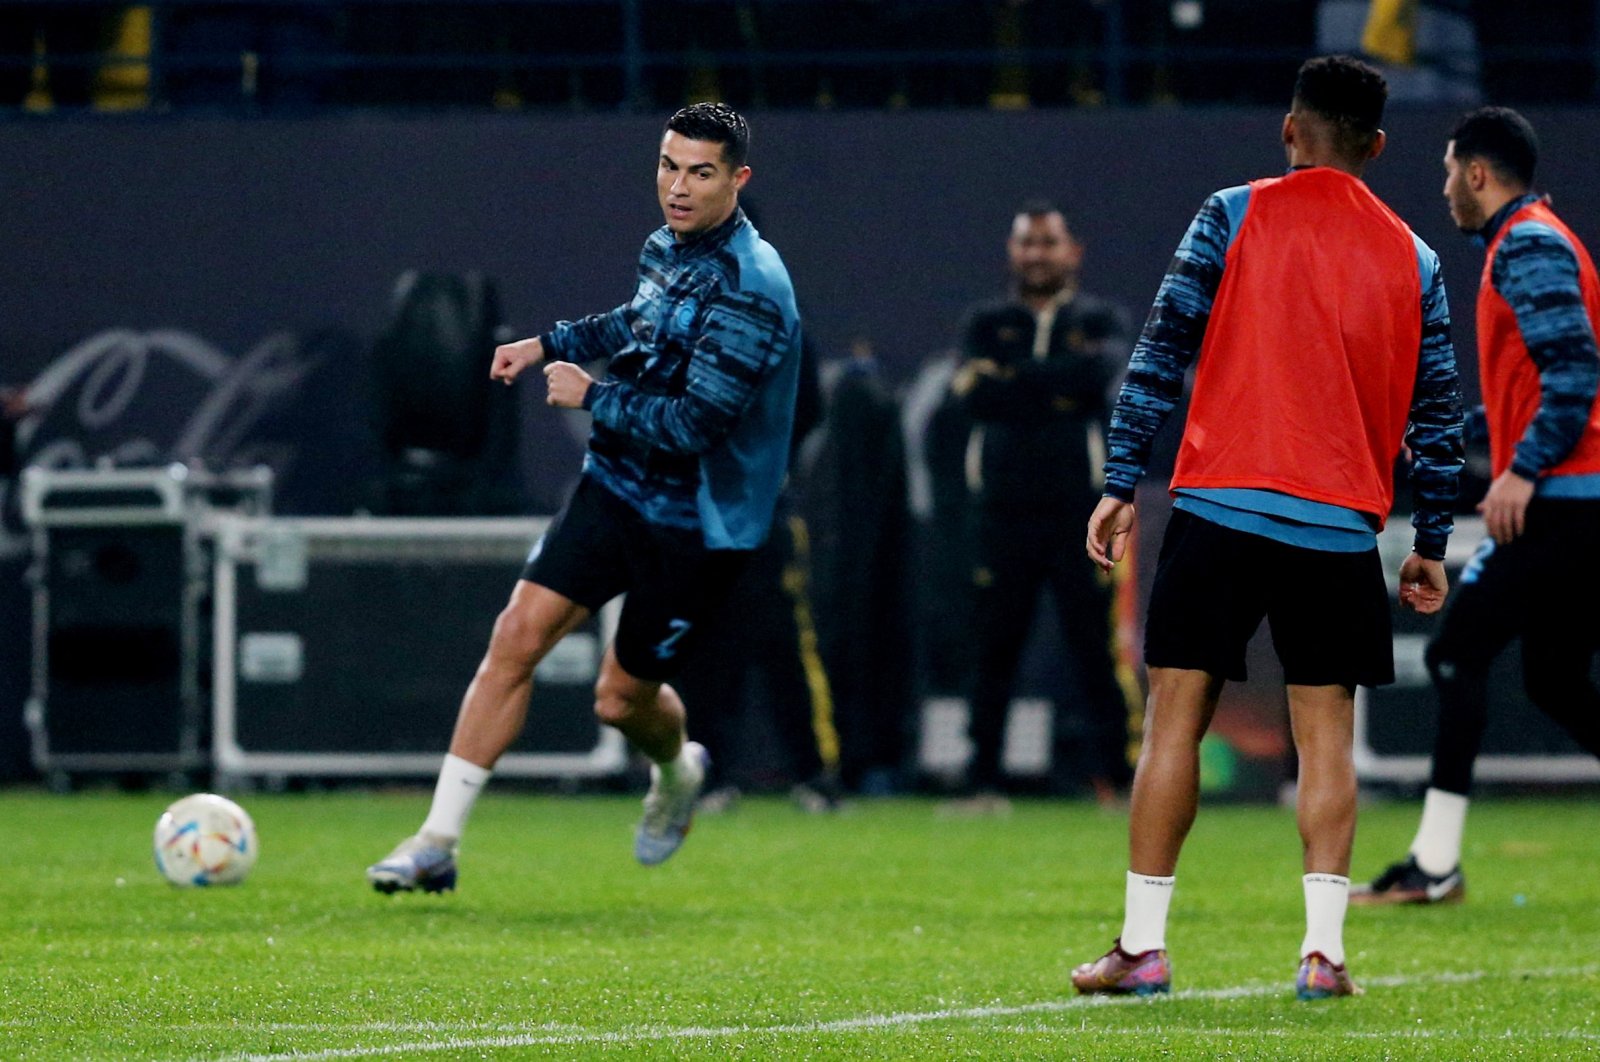 Ronaldo’s Al-Nassr debut show on hold over foreign player quota